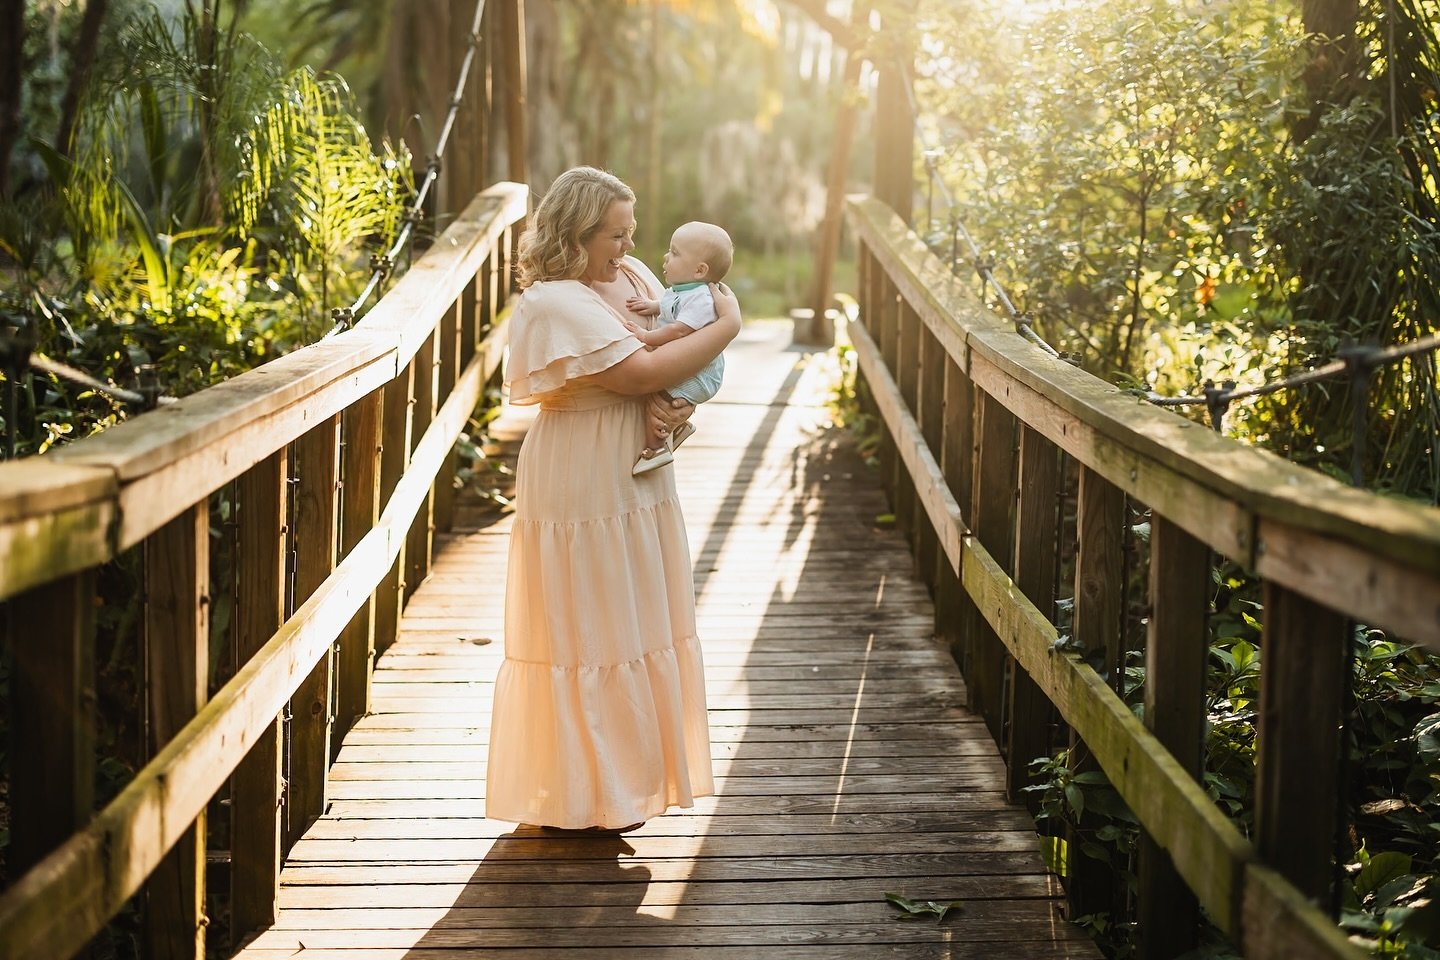 Golden hour, local park, flowy dress, and a baby. This is what I hope I get to see all the time this summer.

Book your full family sessions and take advantage of Orlando&rsquo;s buttery sunshine. ☀️ 
#orlandofamilyphotographer #orlandophotographer #